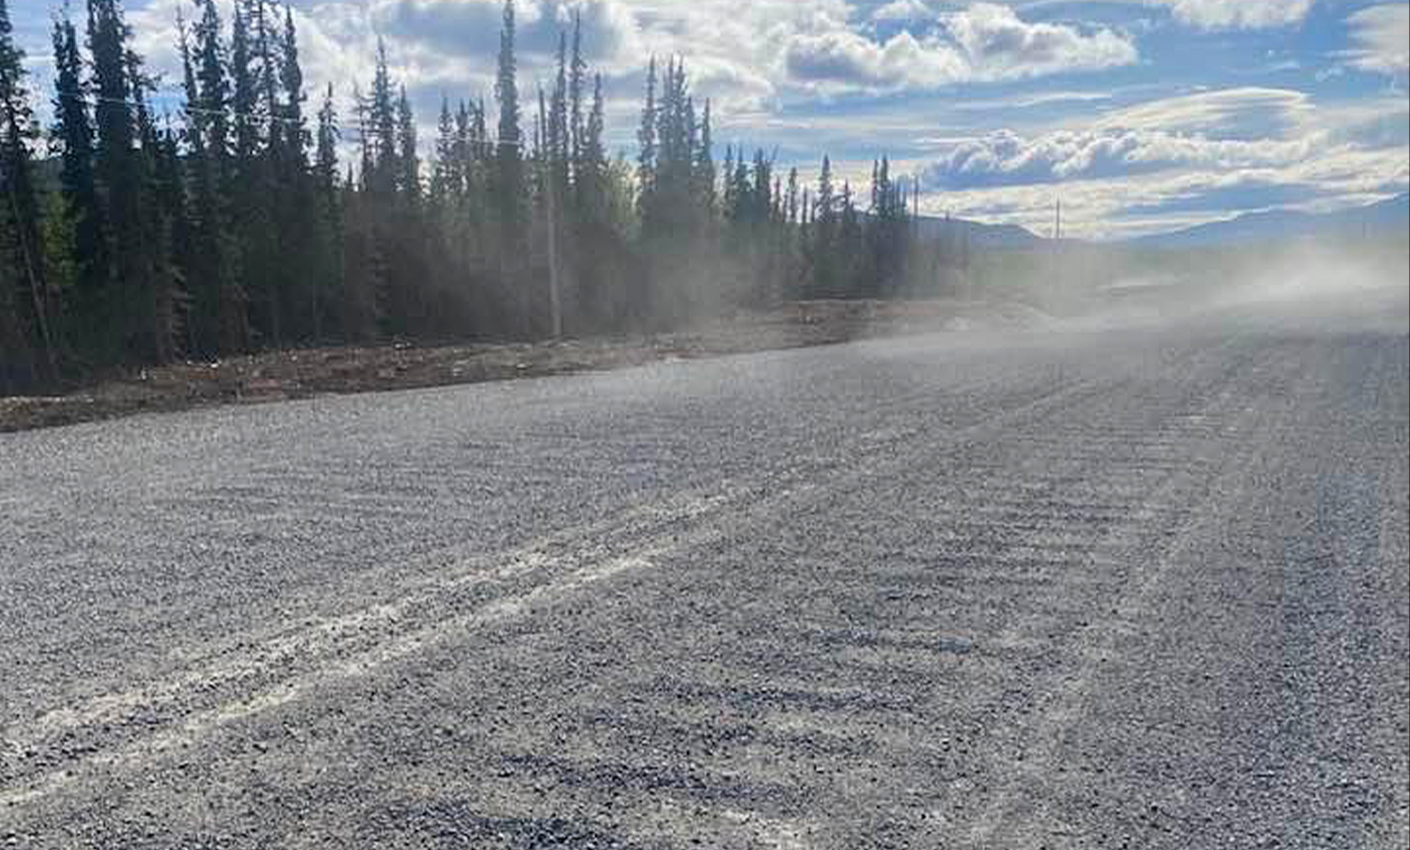 POOR CONDITIONS DECRIED – Motorists travelling the Alaska Highway between Whitehorse and Haines Junction encounter stretches like this one, prompting Yukon Party MLAs to speak out. (Photo submitted)